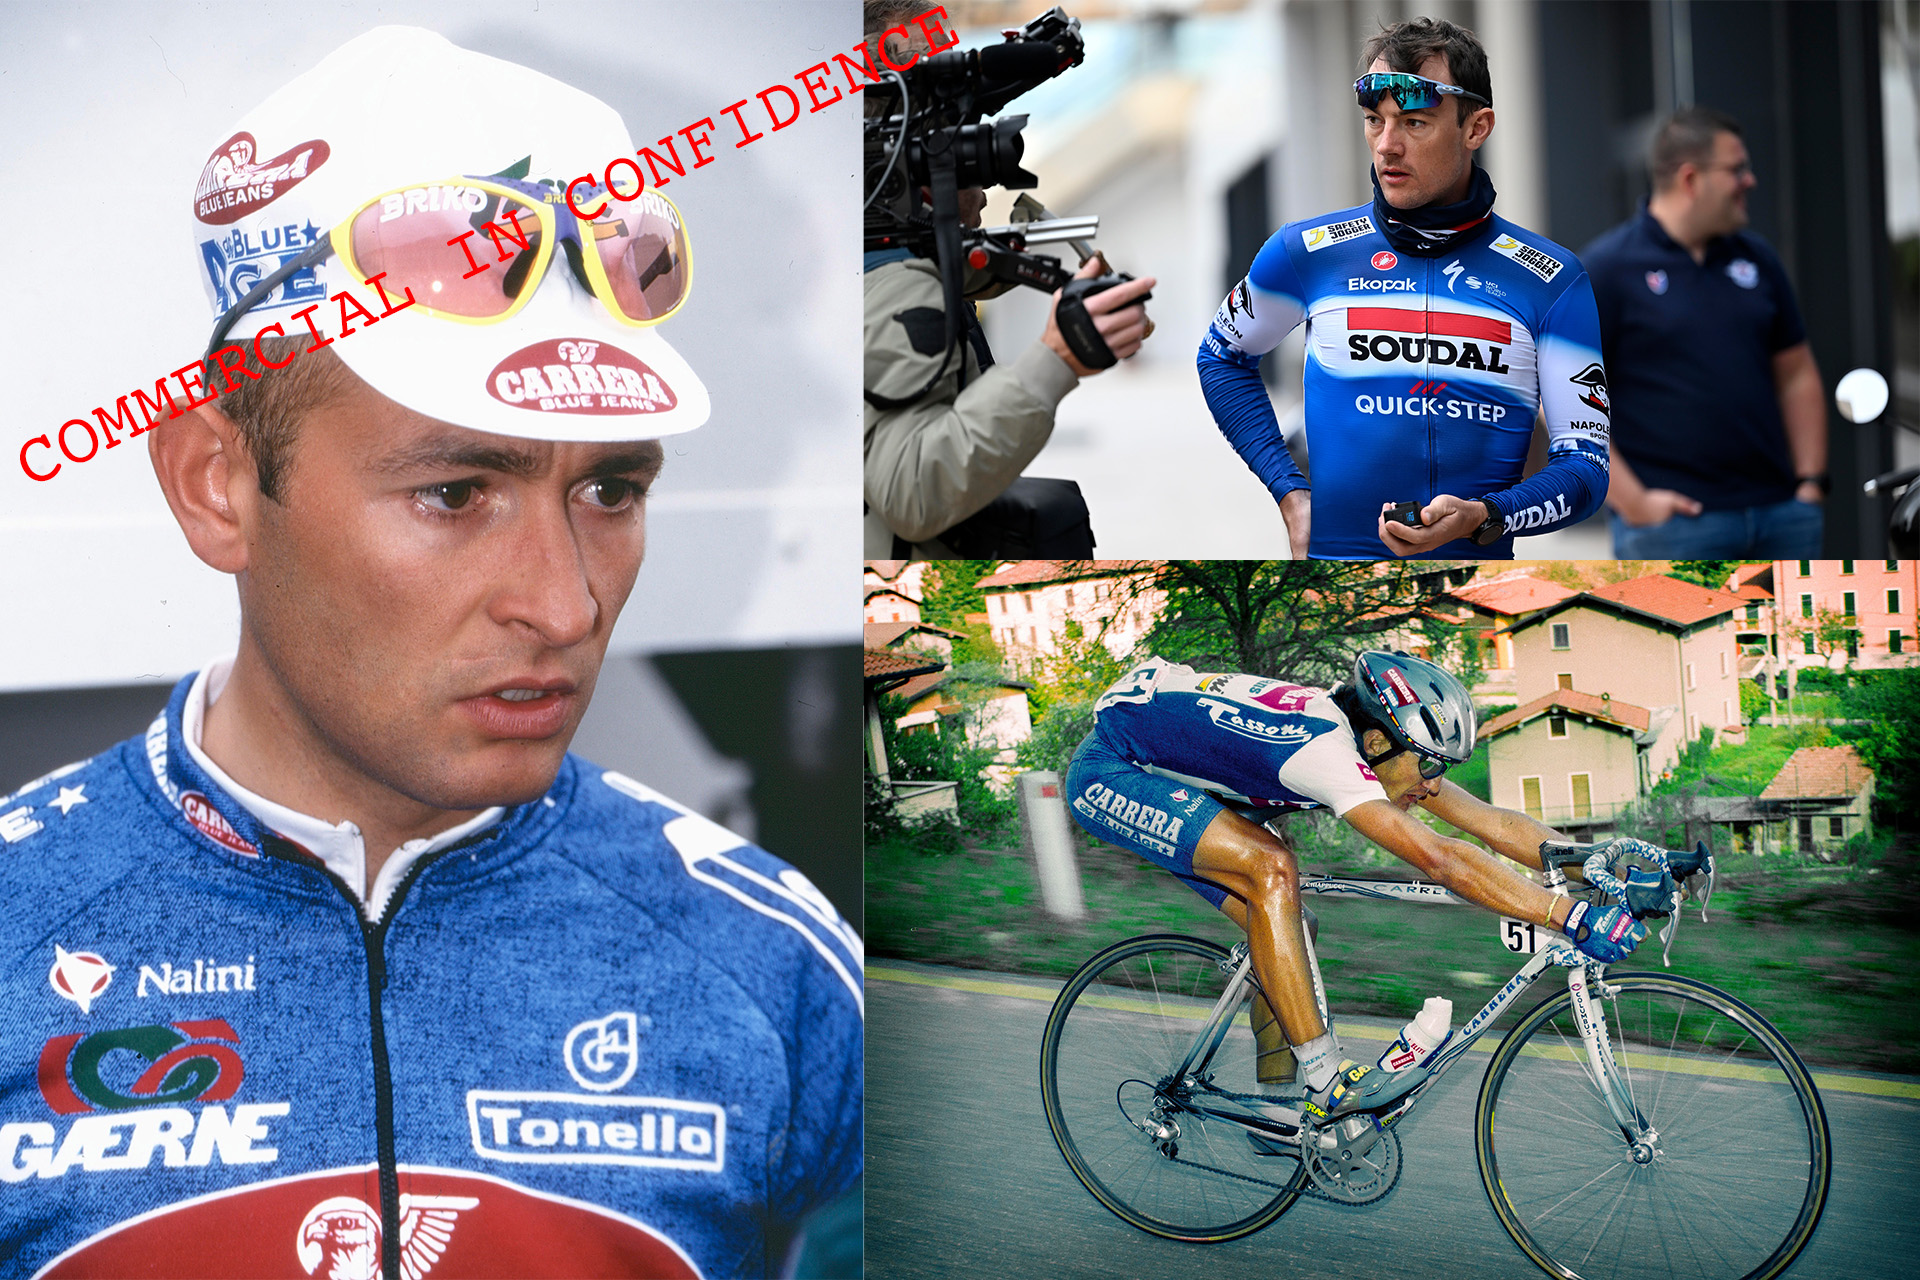 Another moodboard, featuring shots of Marco Pantani in Carrera kit, Claudio Chiapucci descending recklessly in Careera kit, and tractor enthusiast Yves Lampaert in Soudal Quickstep kit. Again, it says 'Commercial in confidence' on the top left.